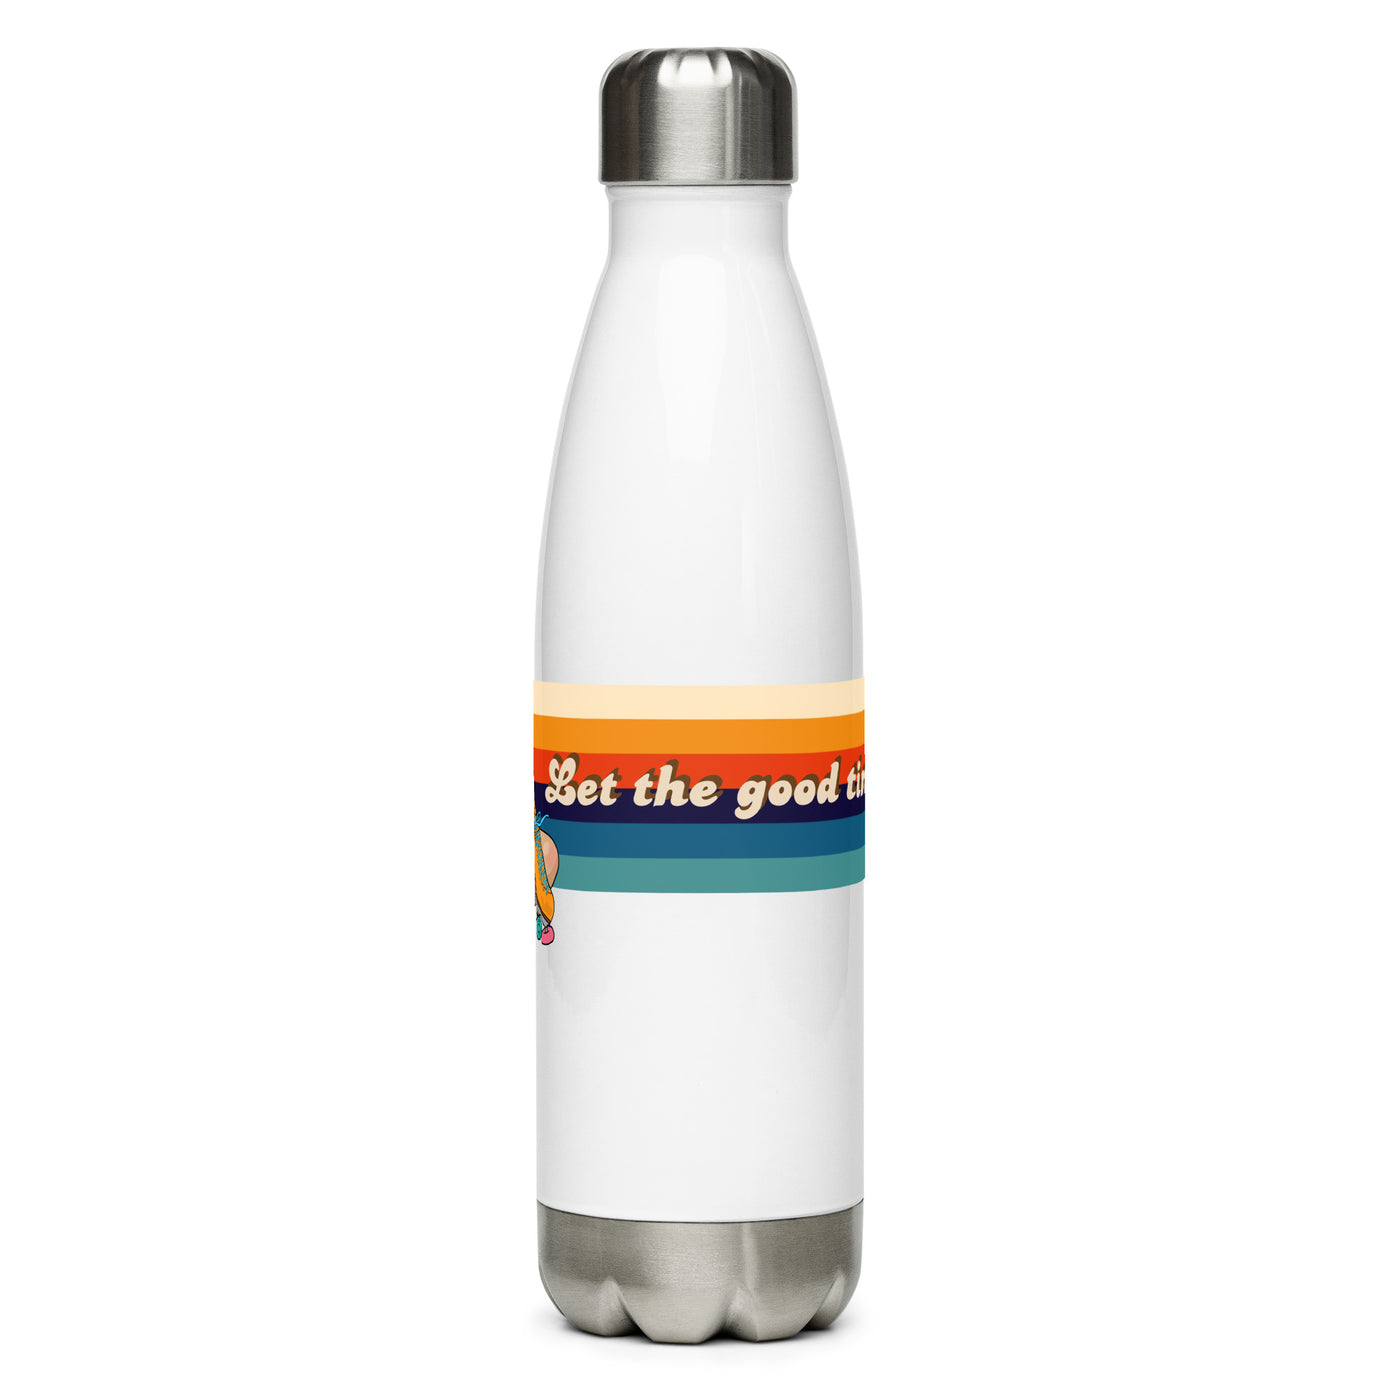 Let the Good Times Roll Stainless Steel Water Bottle